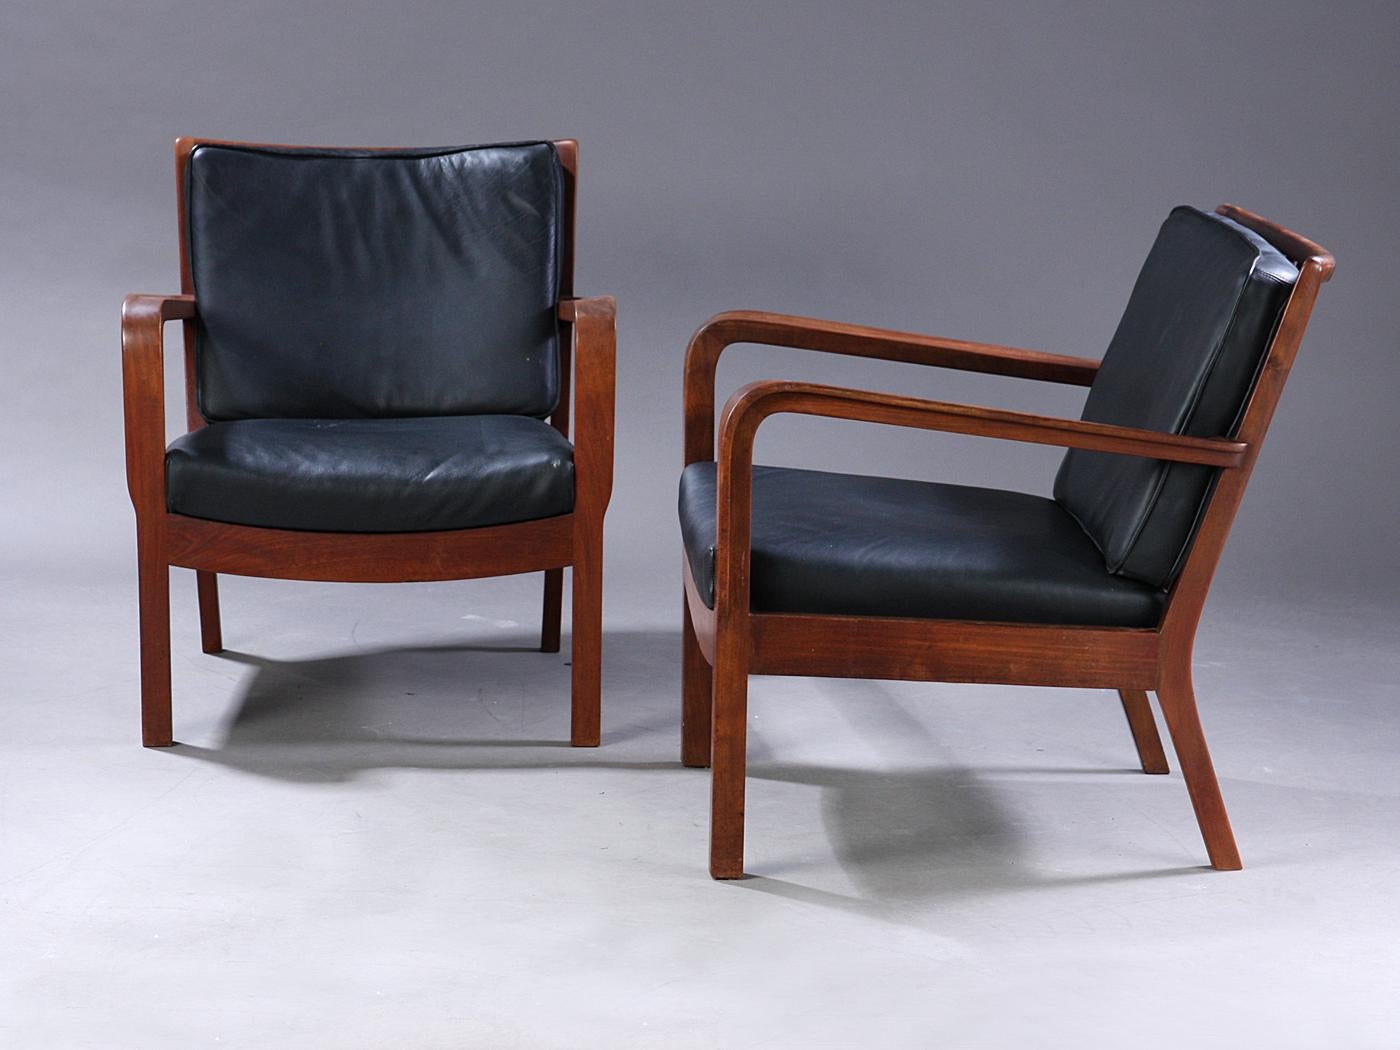 Mid-20th Century Pair of Vilhelm Lauritzen Low Armchairs in Cuba Mahogany, 1928-1930 For Sale